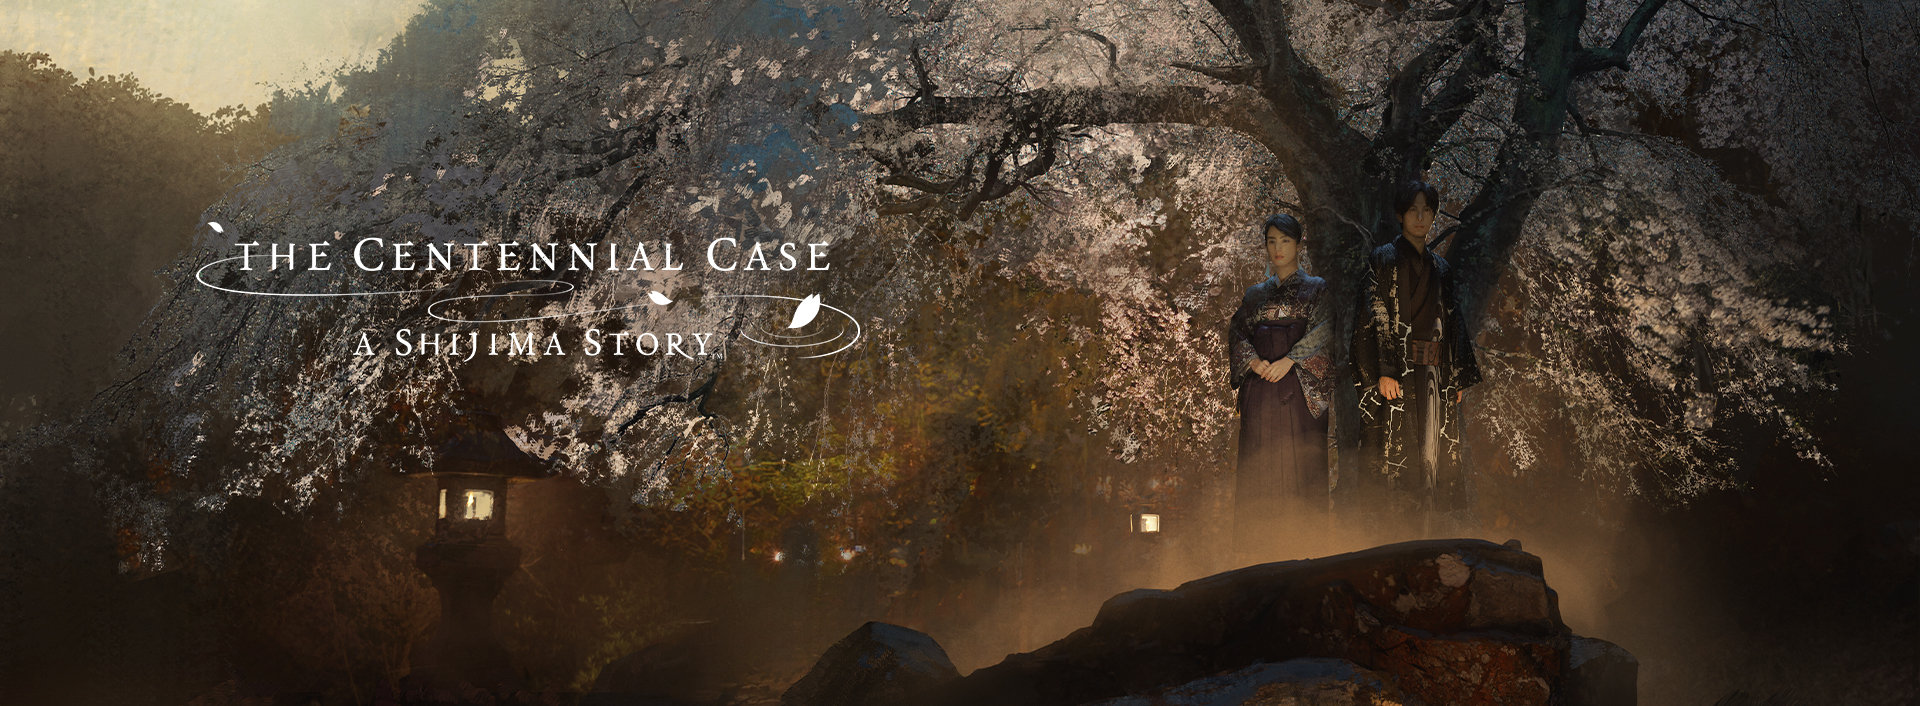 The Centennial Case: A Shijima Story | Story &amp; Gameplay Trailer